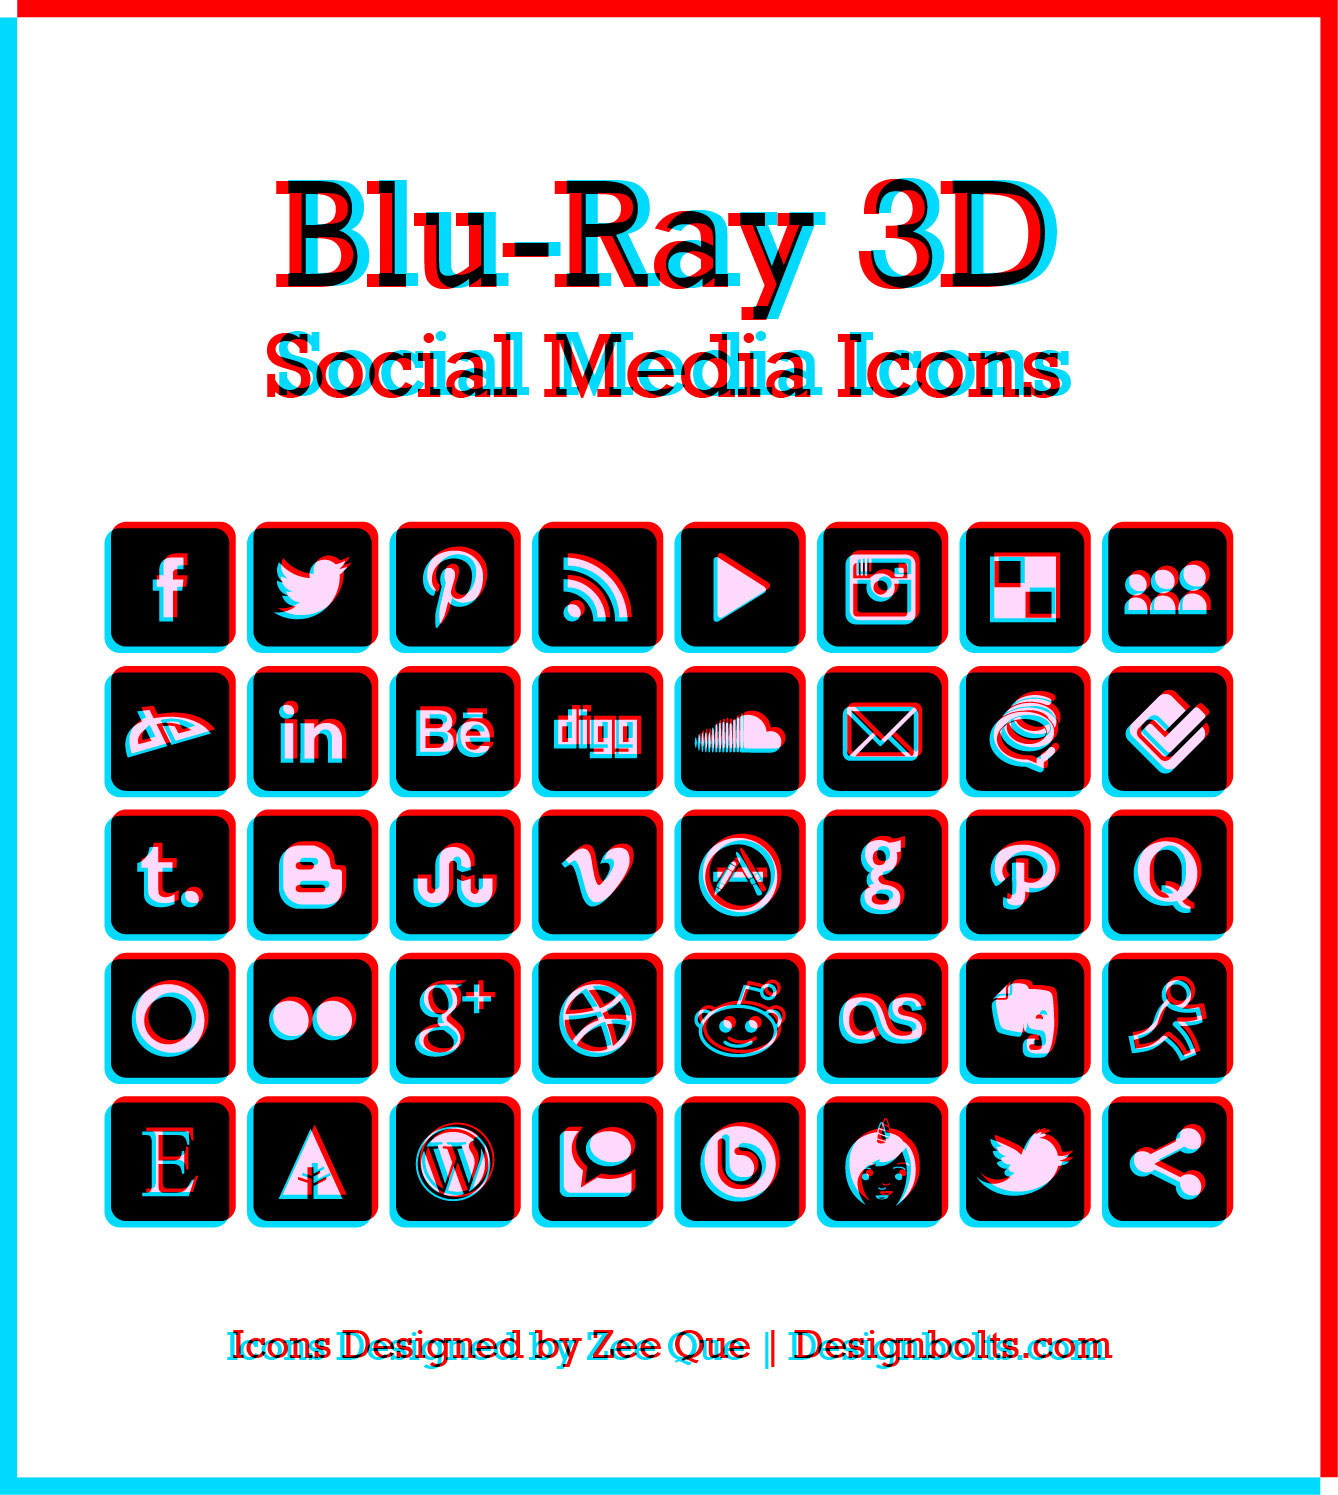 BluRay 3D Social Media Icons | 256 PNGs & Vector .Ai File